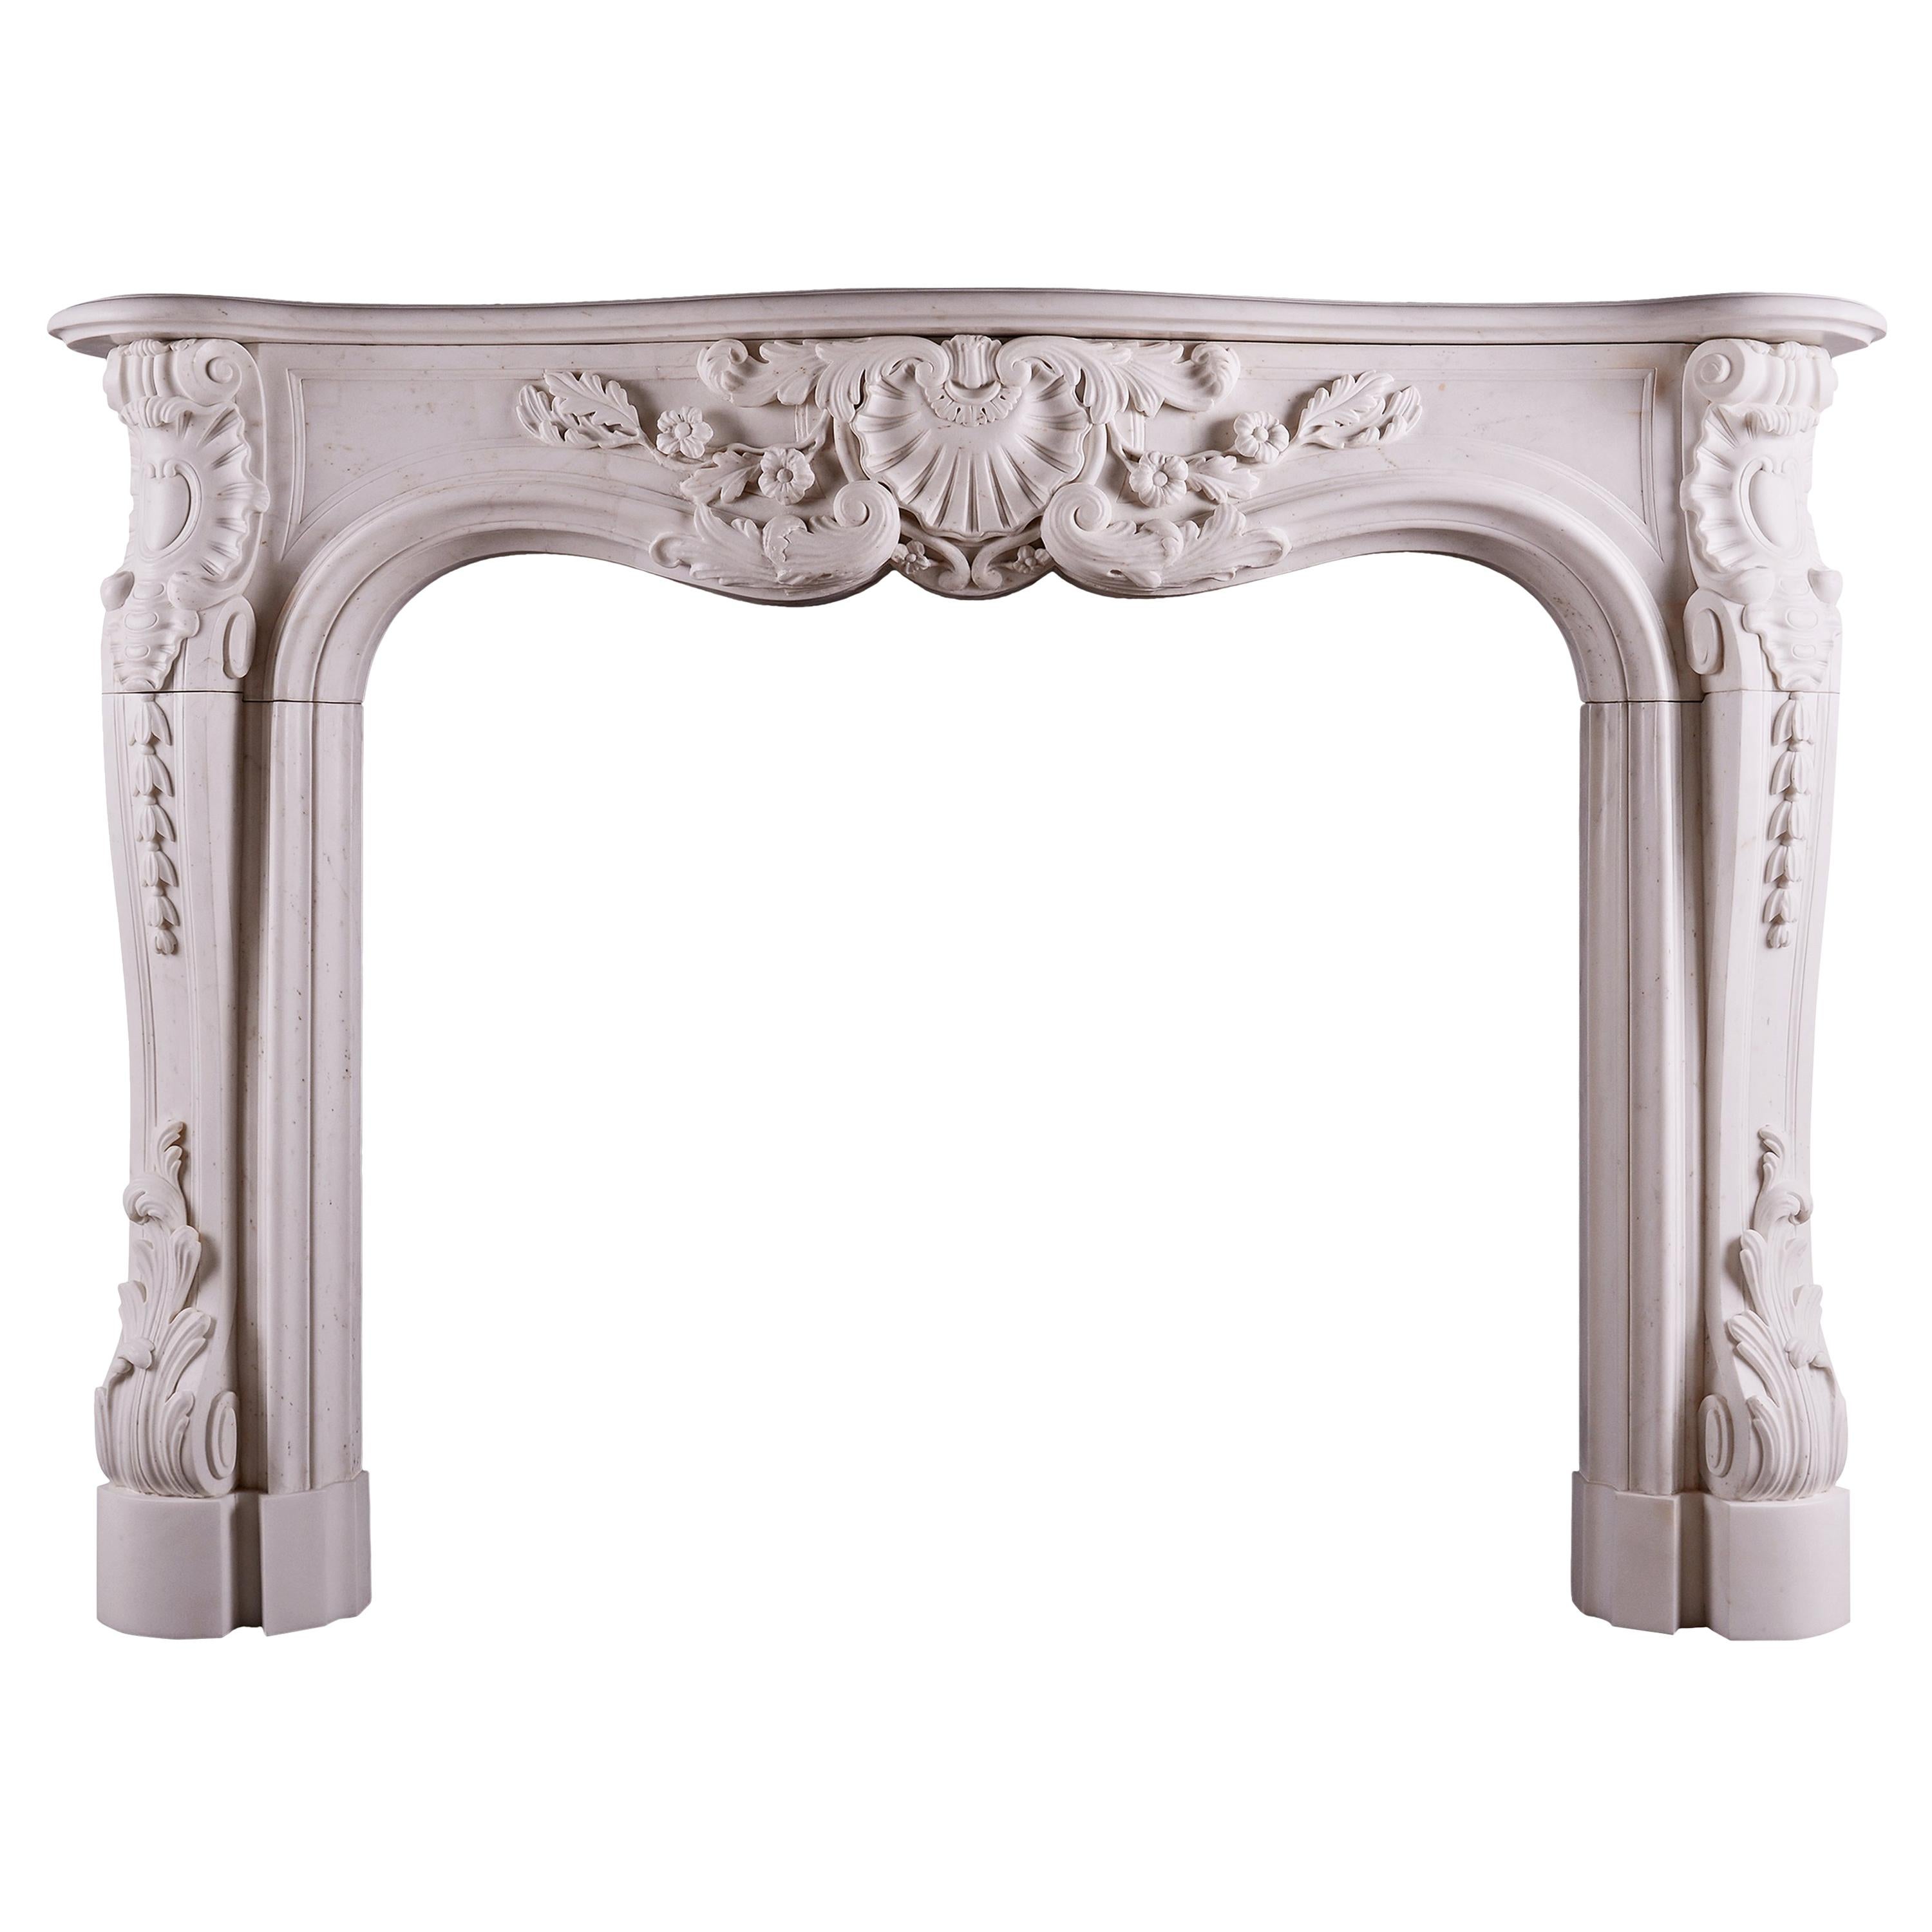 Heavily Carved French Louis XV Style Fireplace For Sale